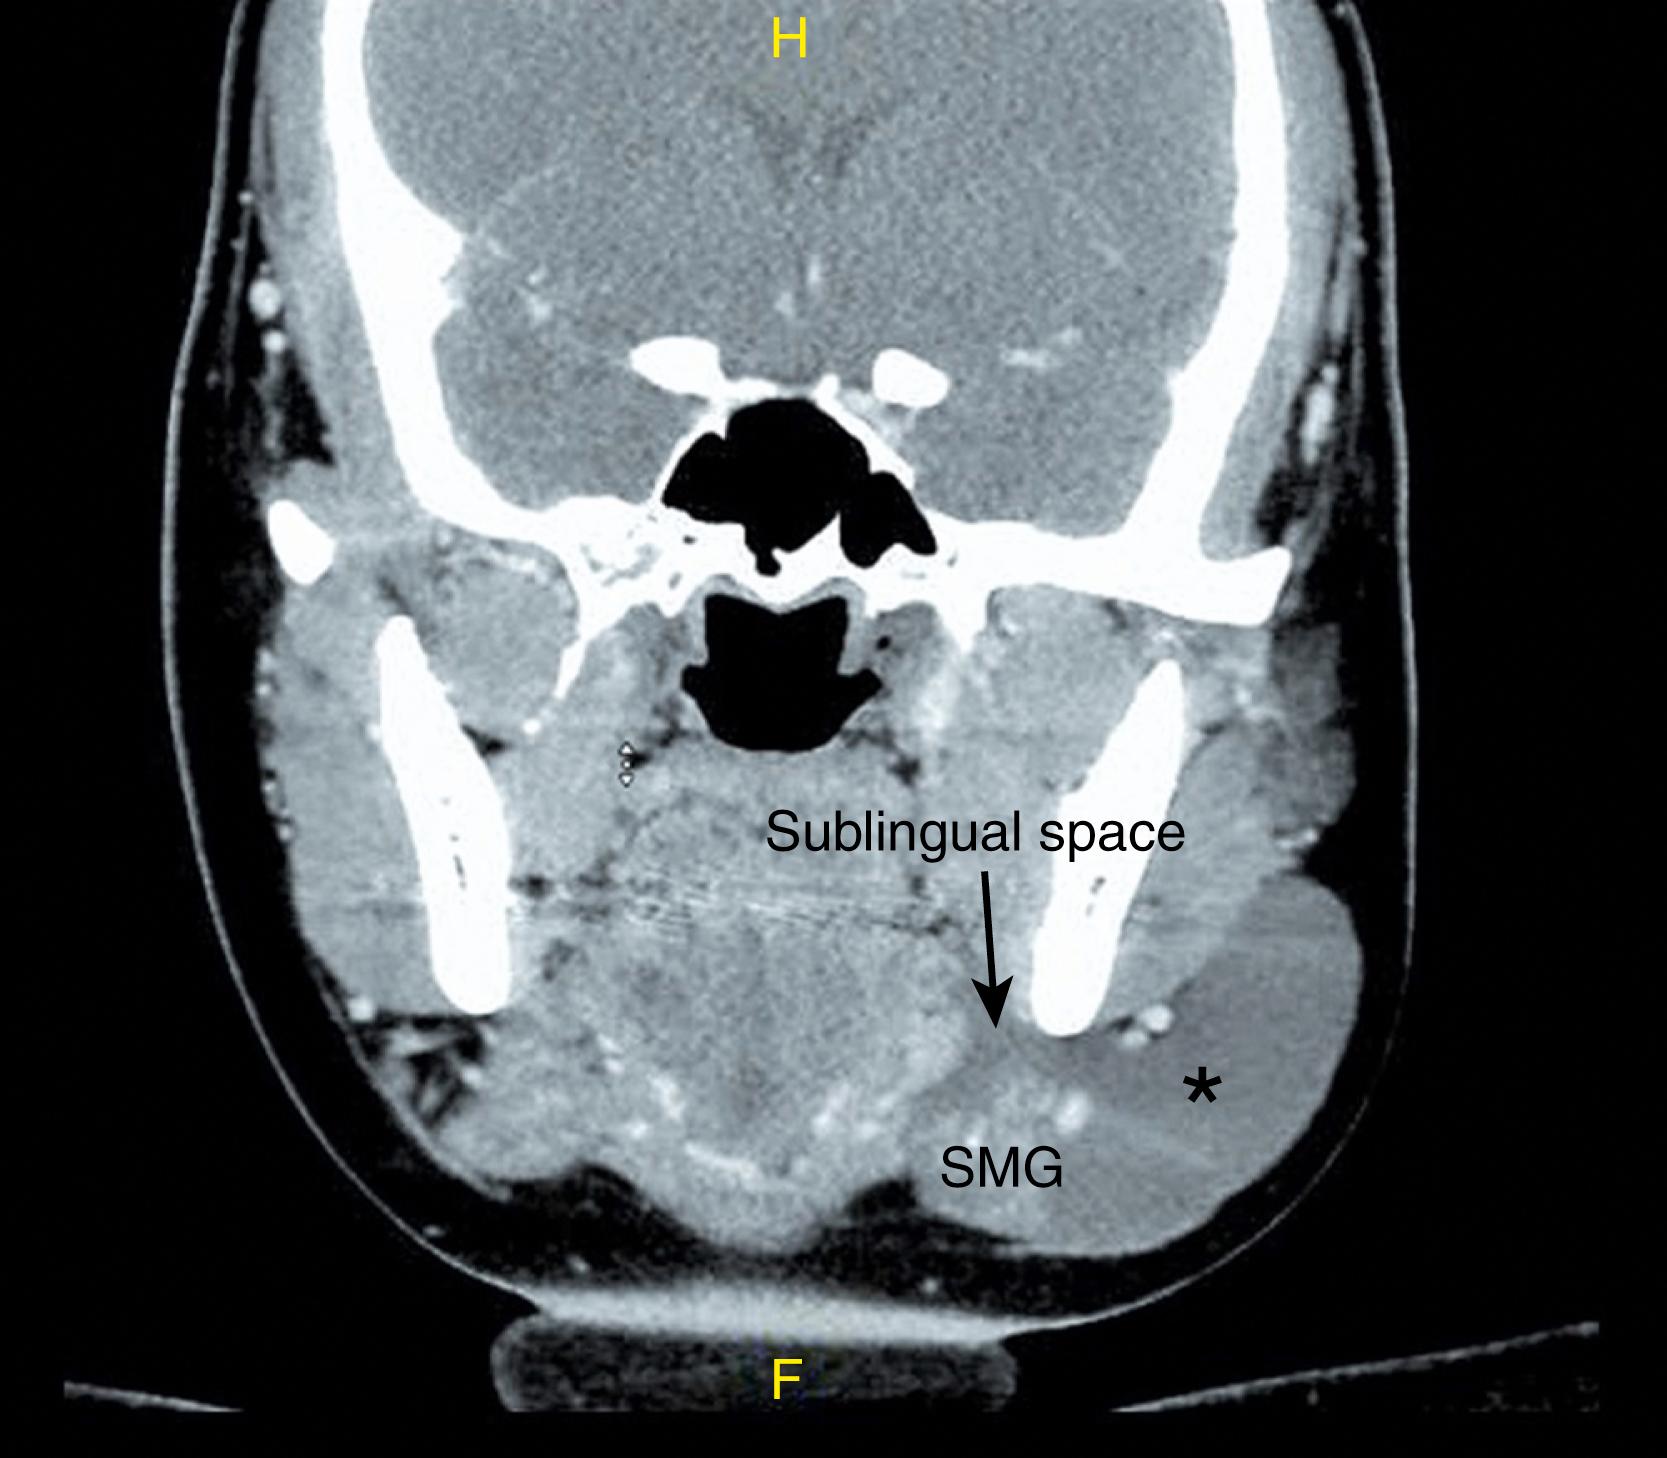 Fig. 89.2, Computed tomography scan (coronal view) showing ranula involving sublingual space and expanding beyond the mylohyoid sling into the upper neck spaces. The arrow points to the sublingual space. SMG indicates the location of the submandibular gland being displaced by the plunging component of the ranula (indicated by asterix).